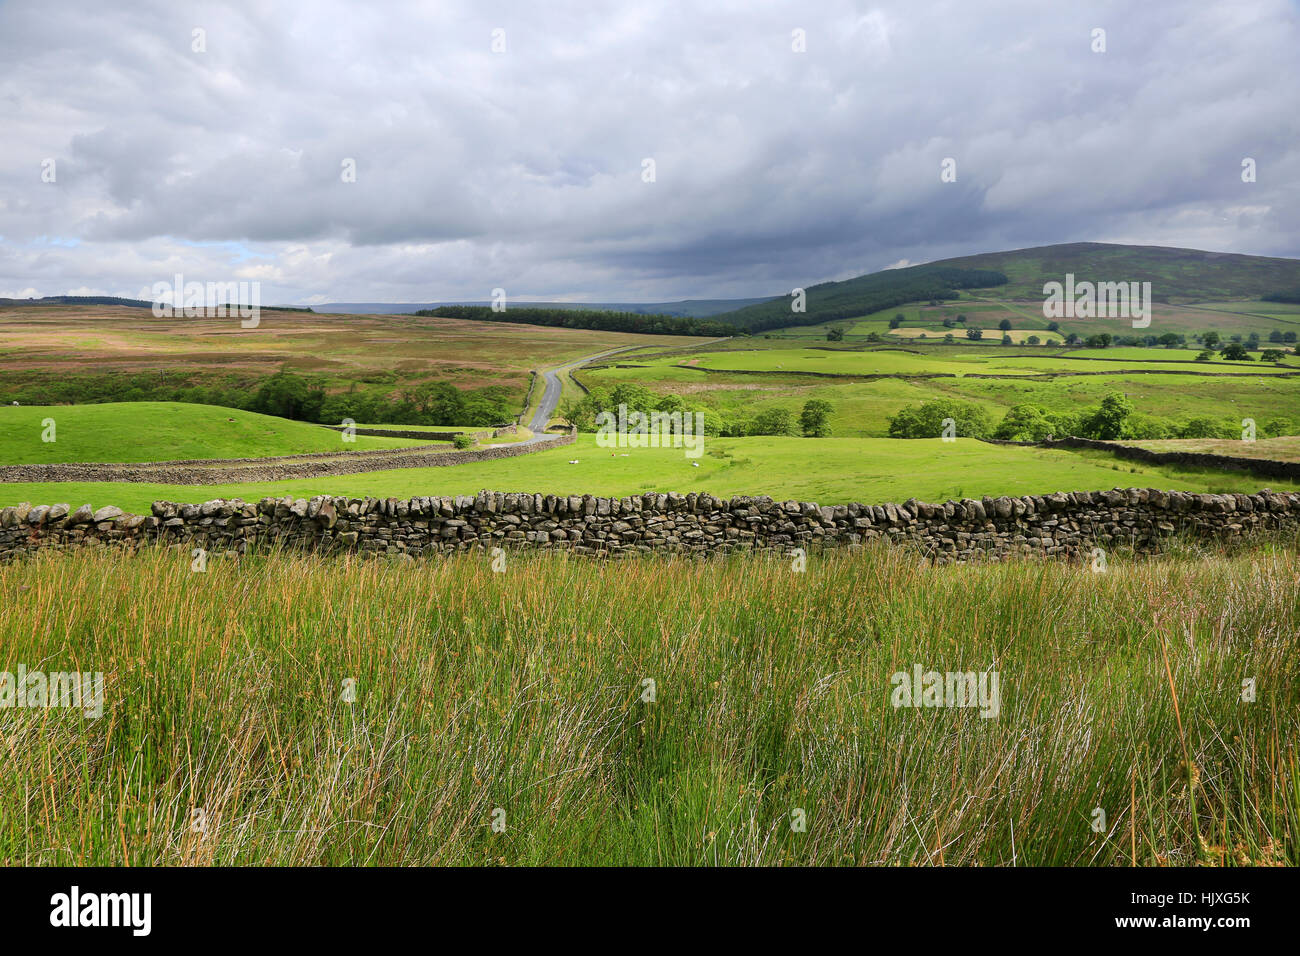 View of Wharfedale in the Yorkshire Dales from near Bolton Abbey Stock Photo